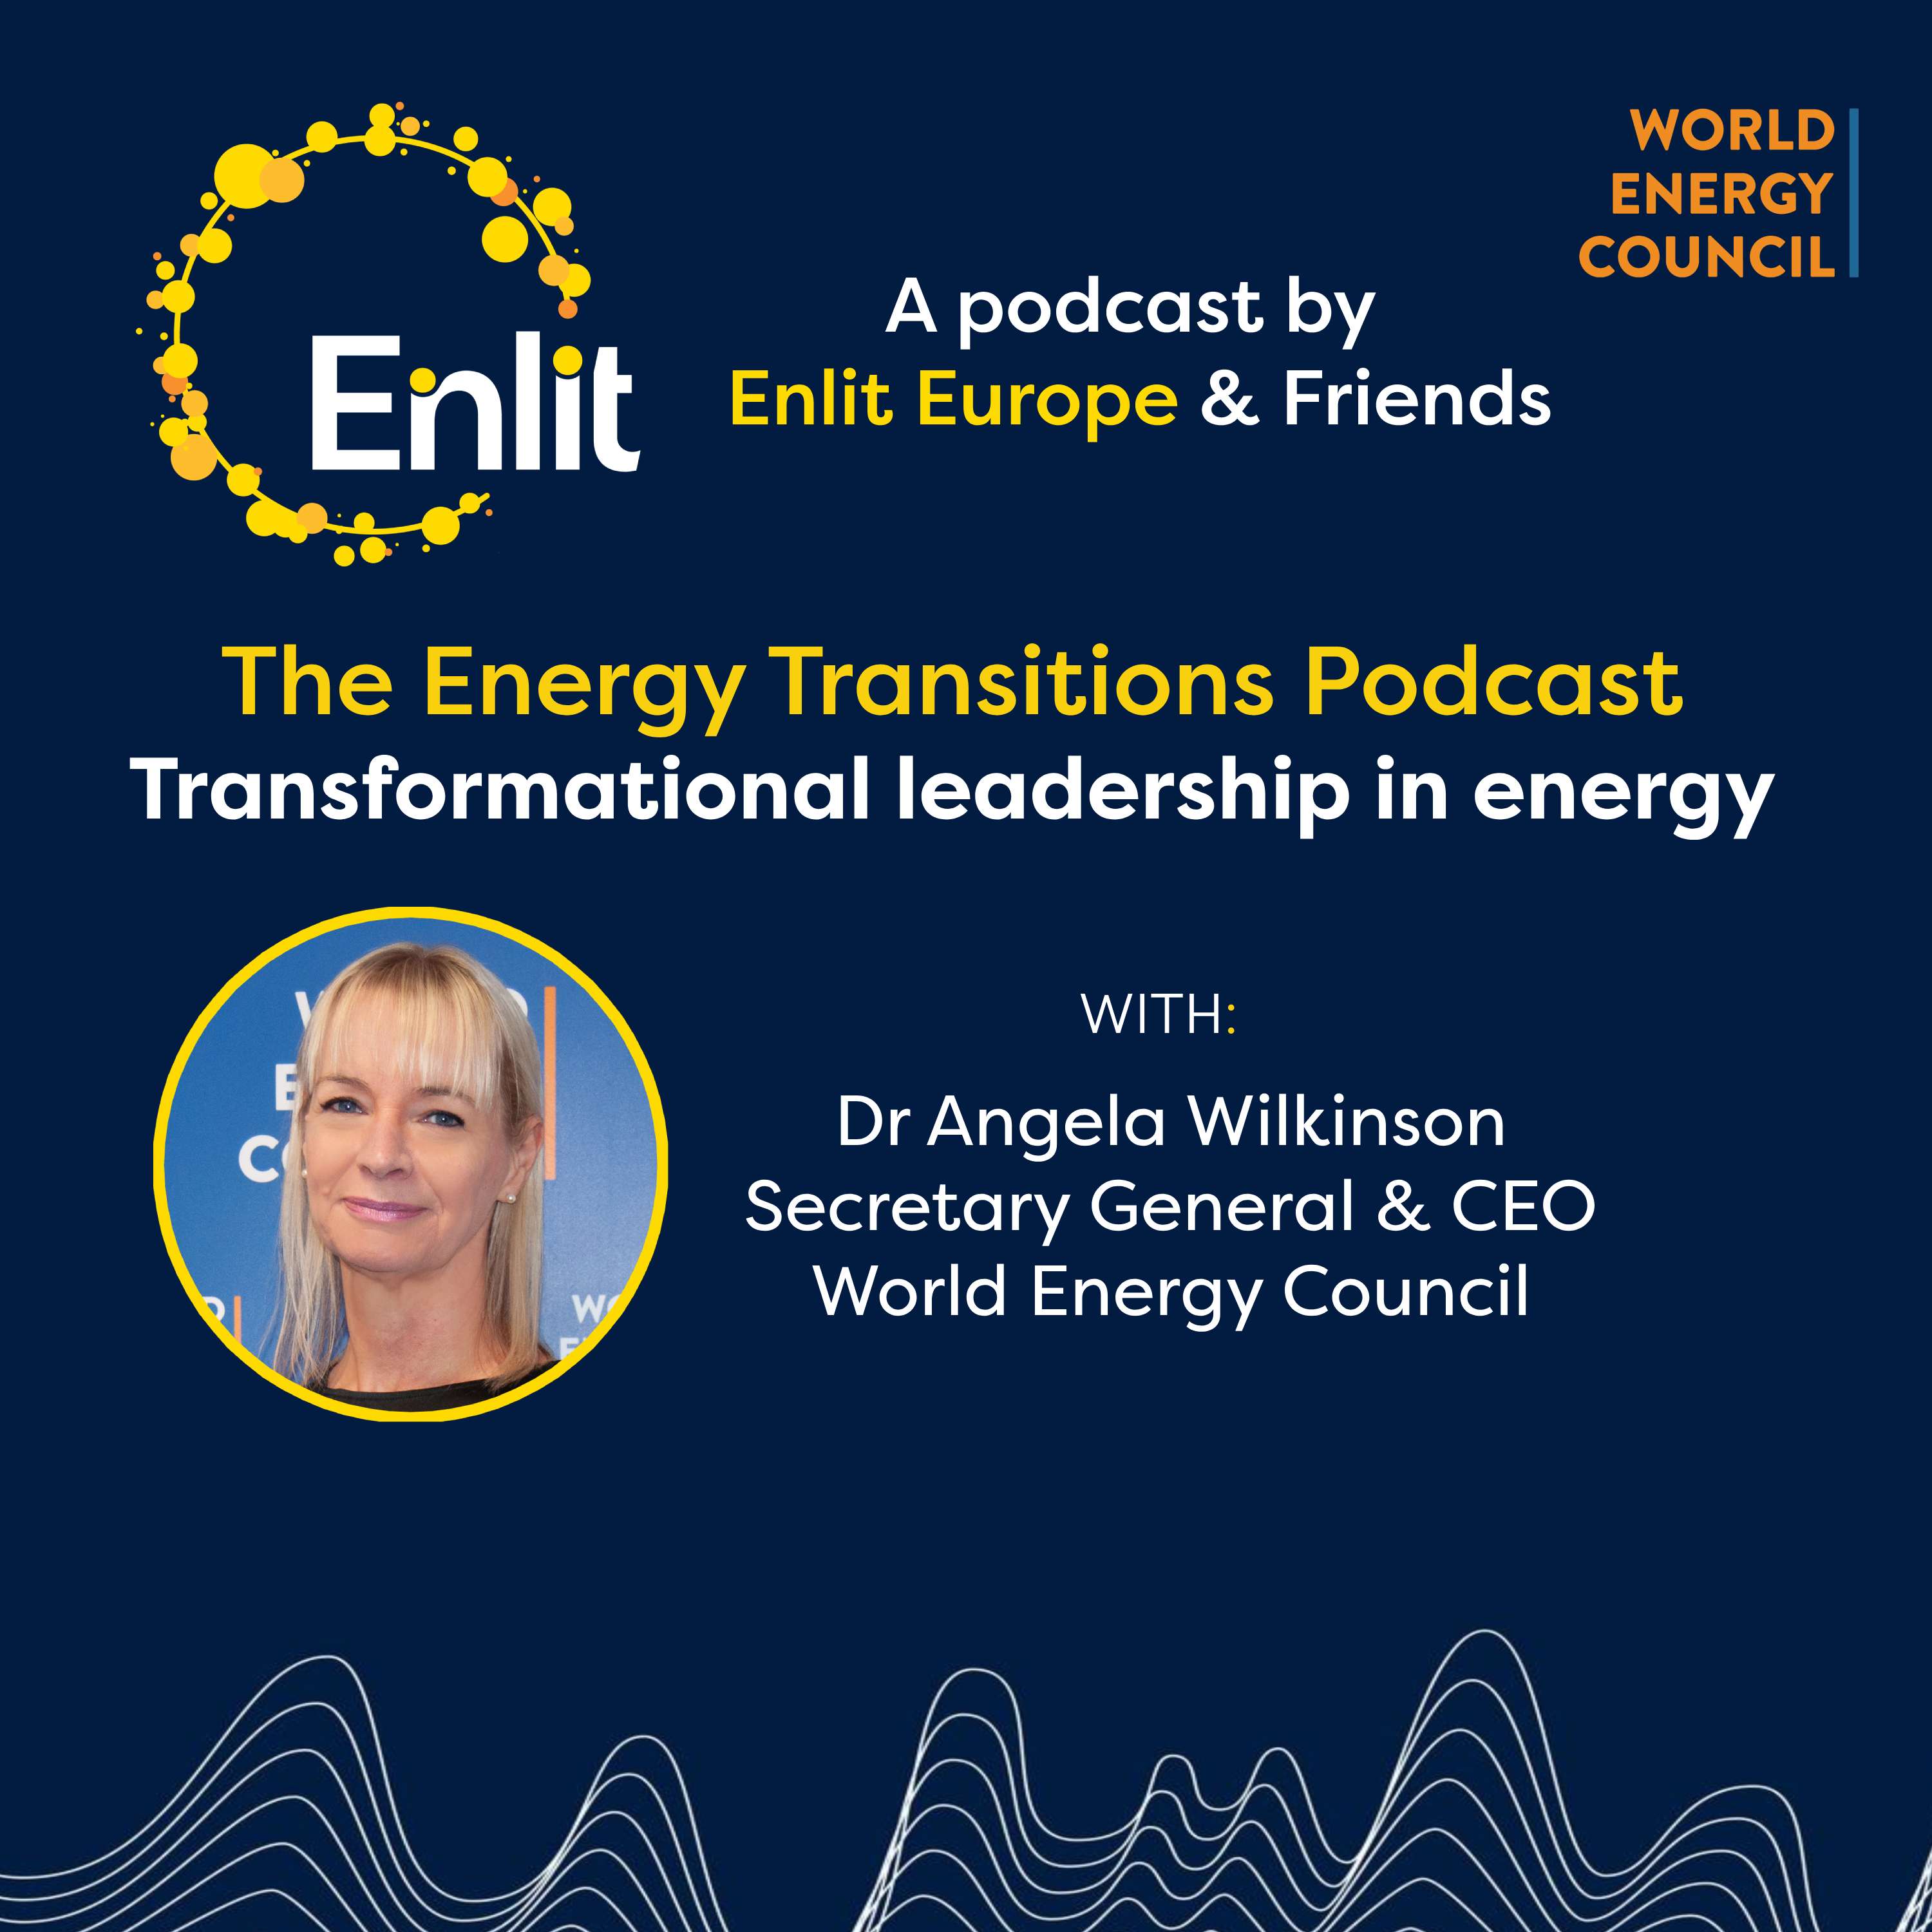 Transformational leadership in energy with Dr Angela Wilkinson